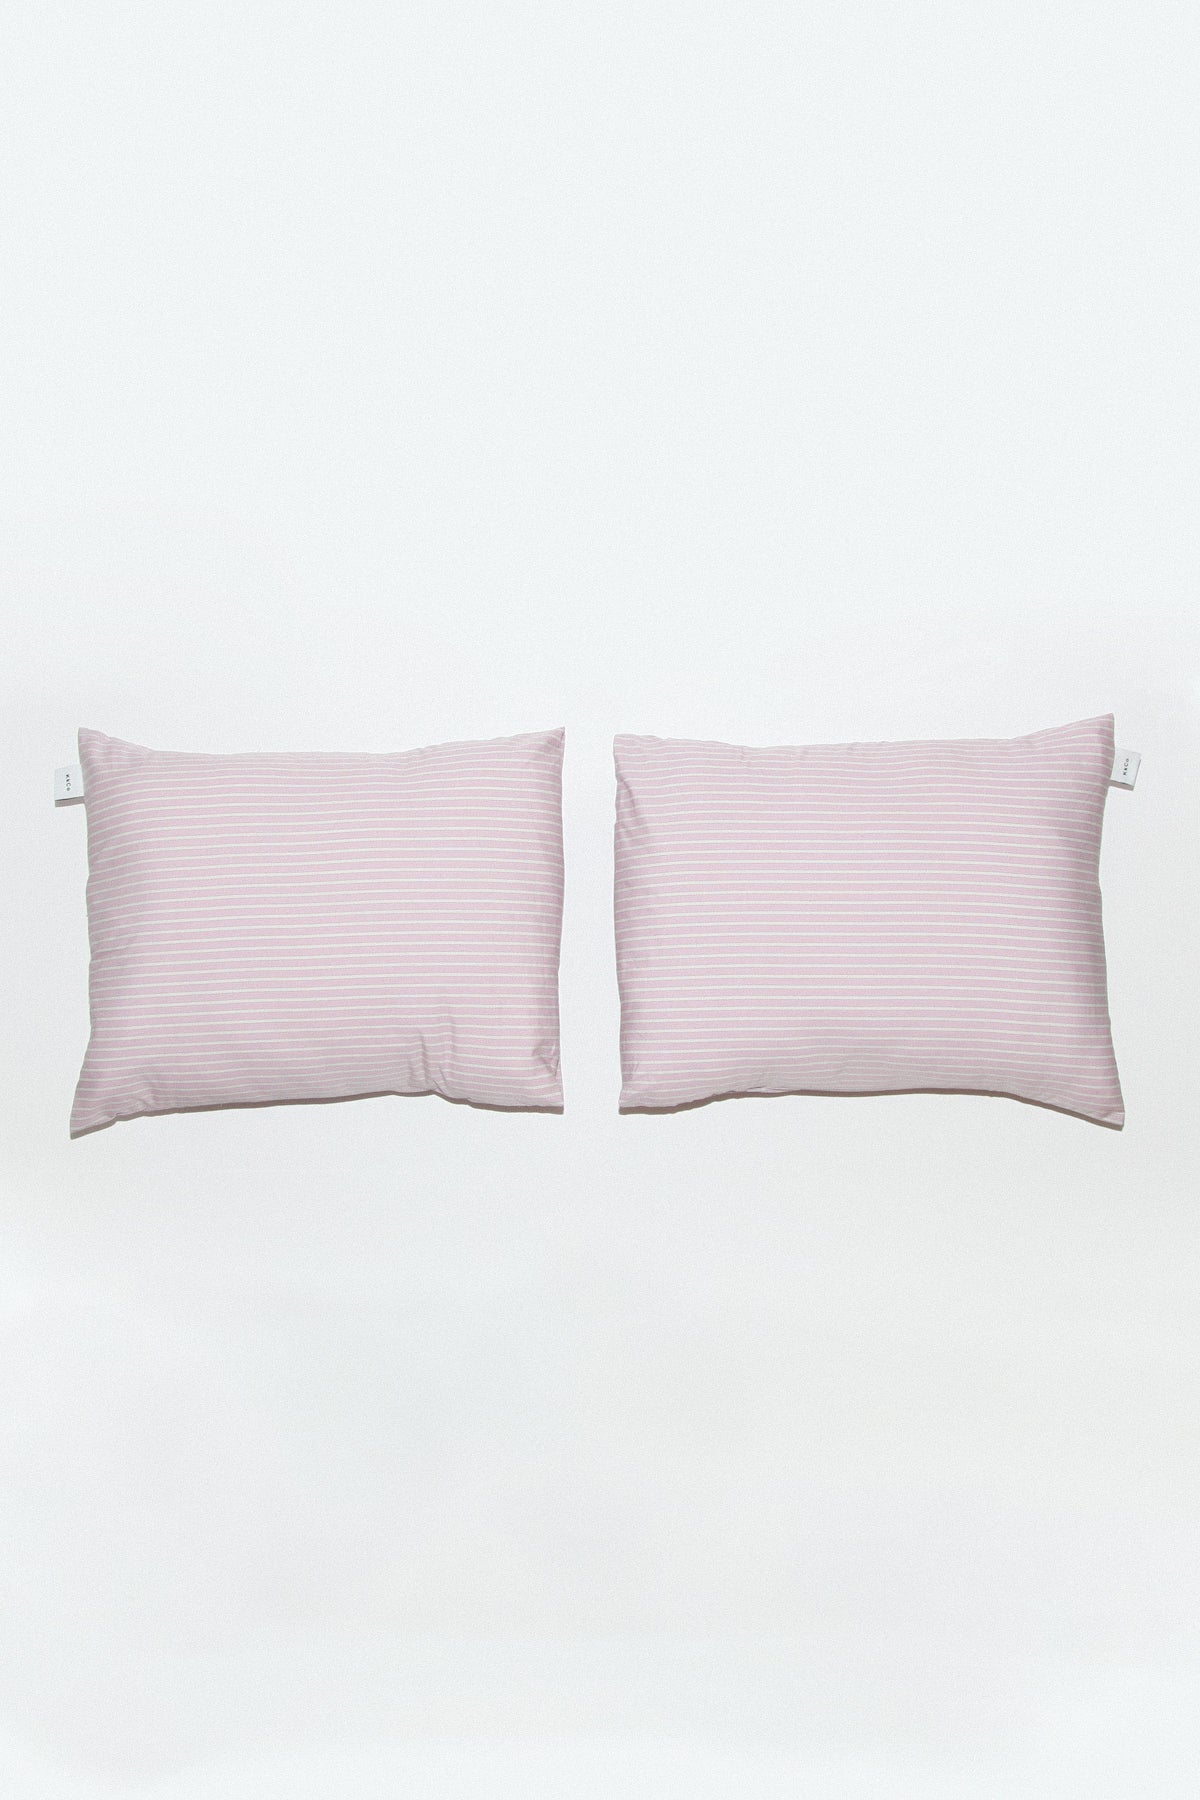 Pillow Sham Set in Striped Lilac